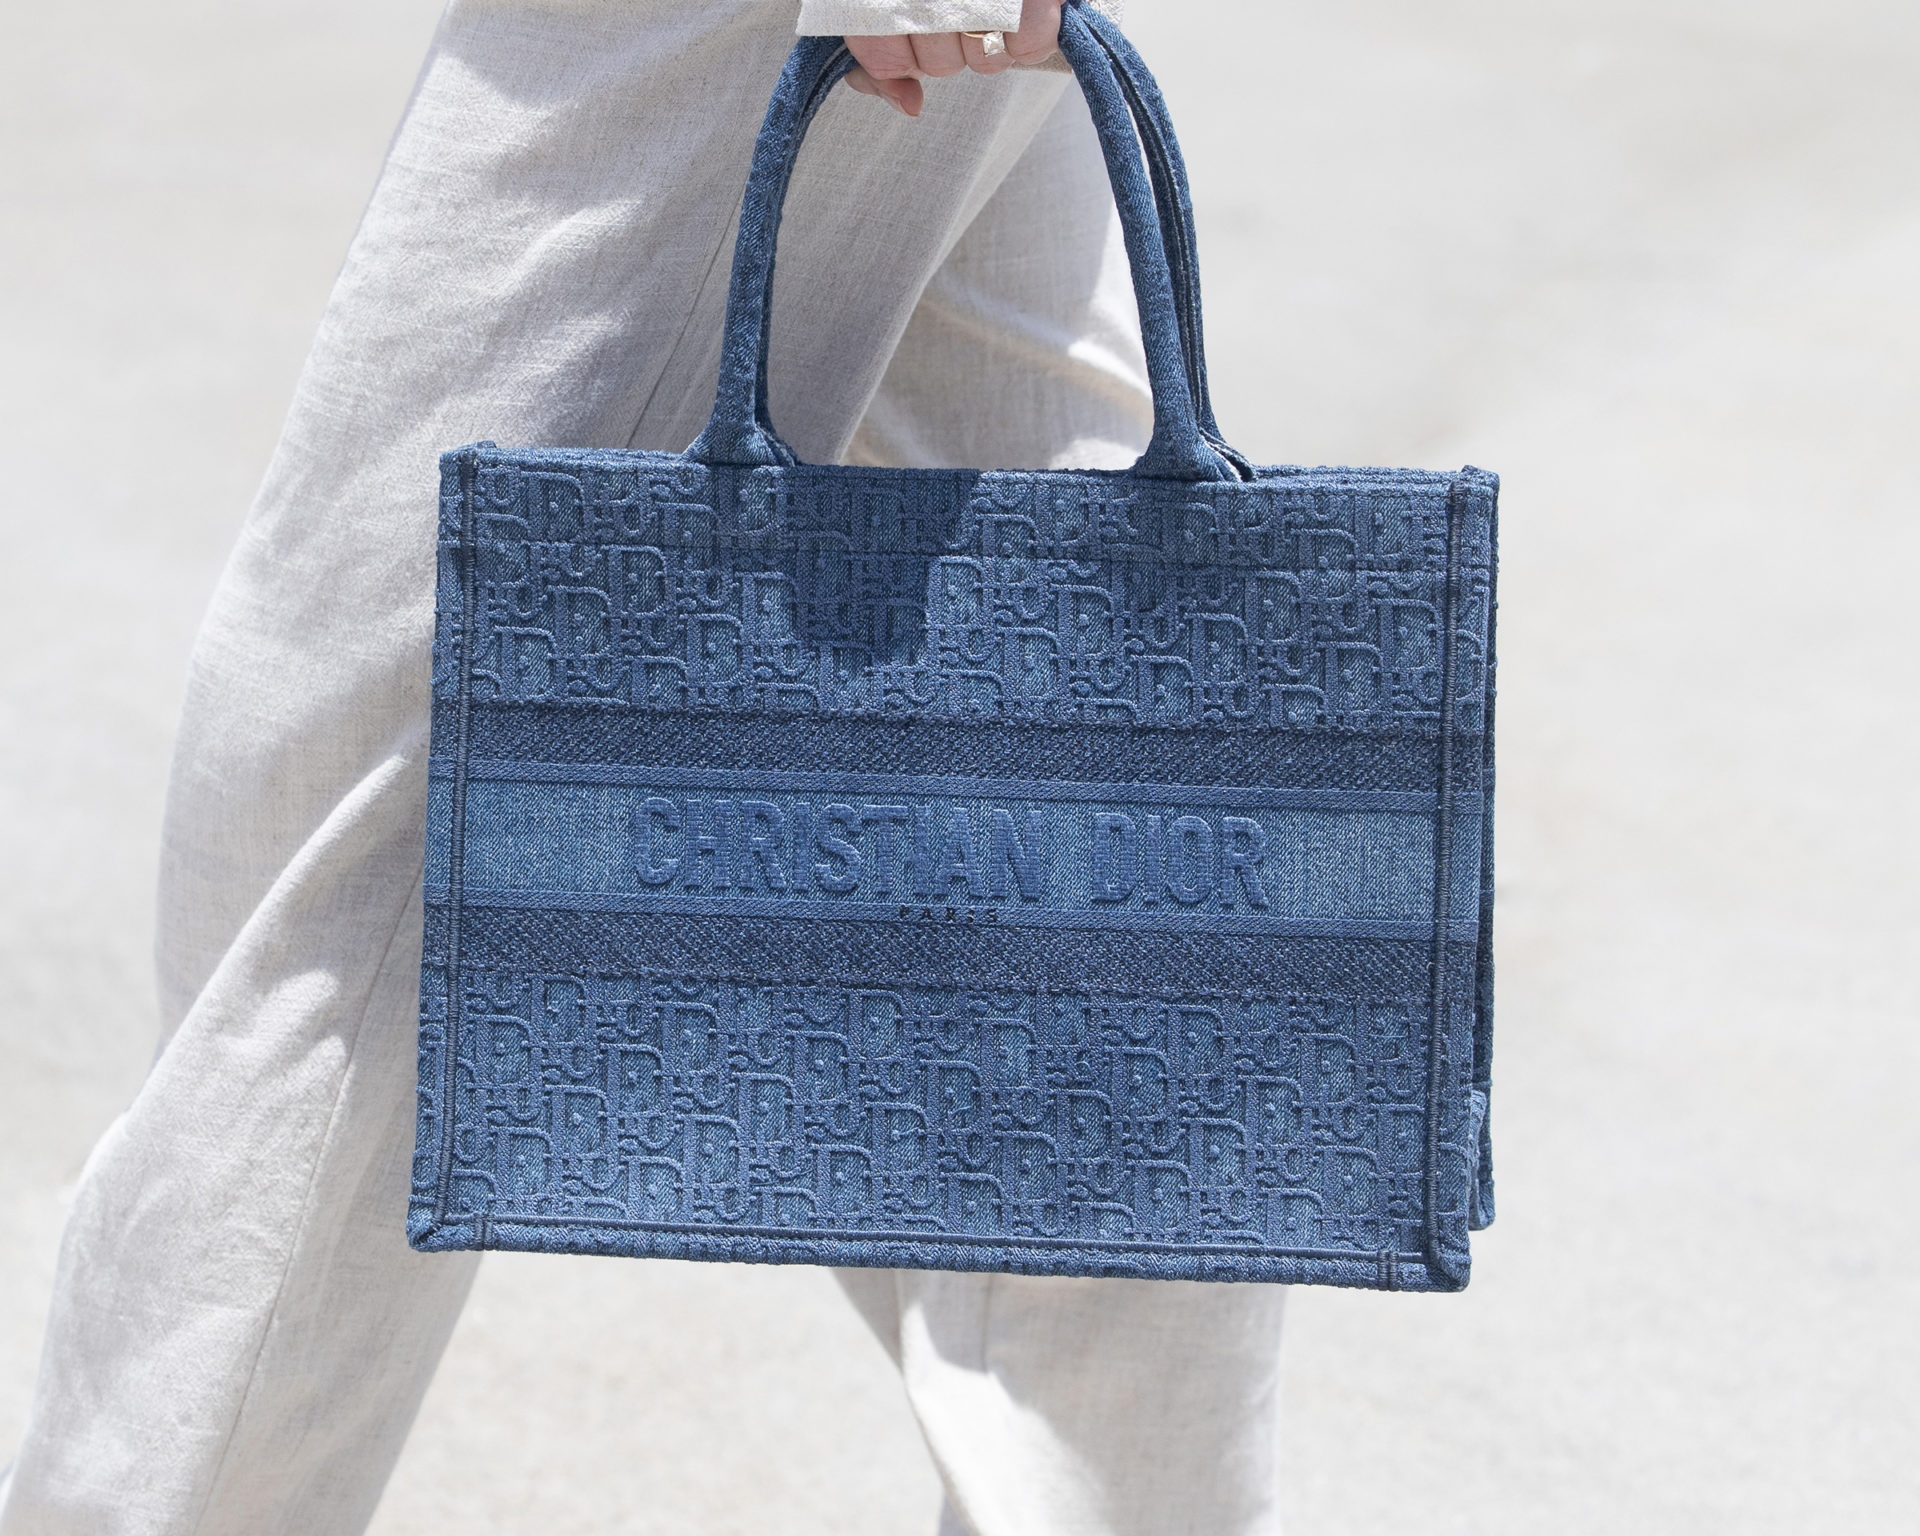 Stylish and practical, the perfect bag for the modern mom. With